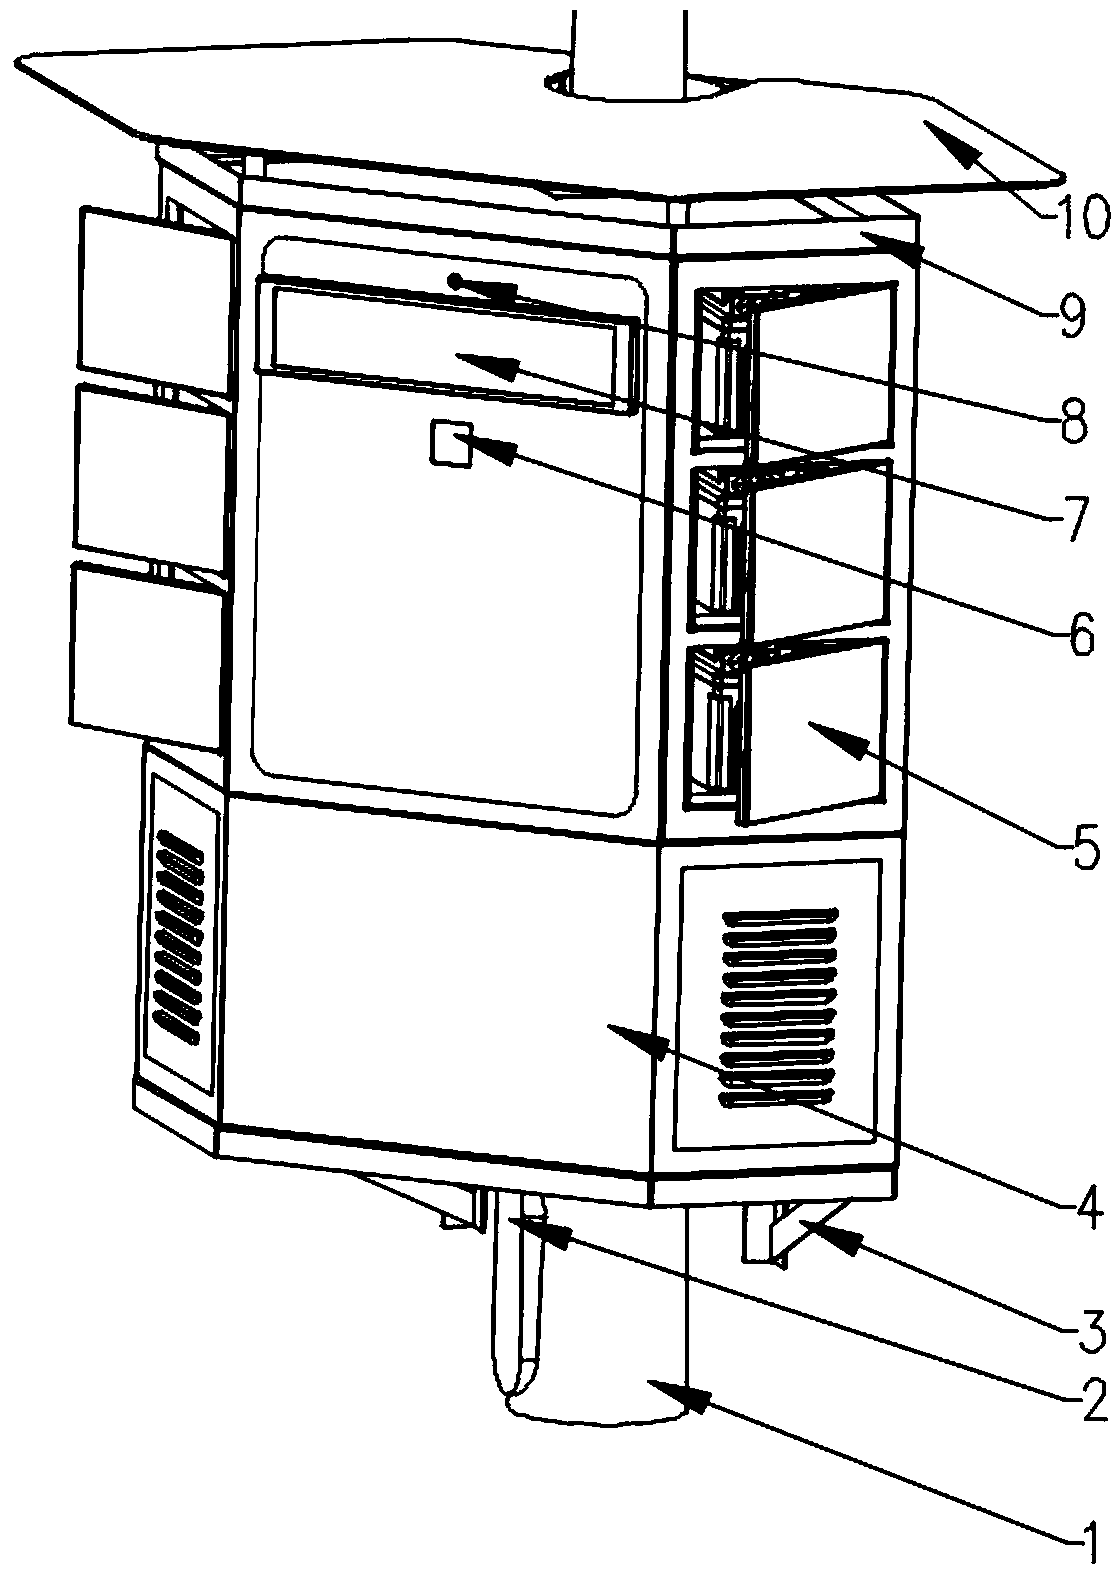 A shared intelligent charging system and a use method thereof, which are provided with a power supply of a city street lamp